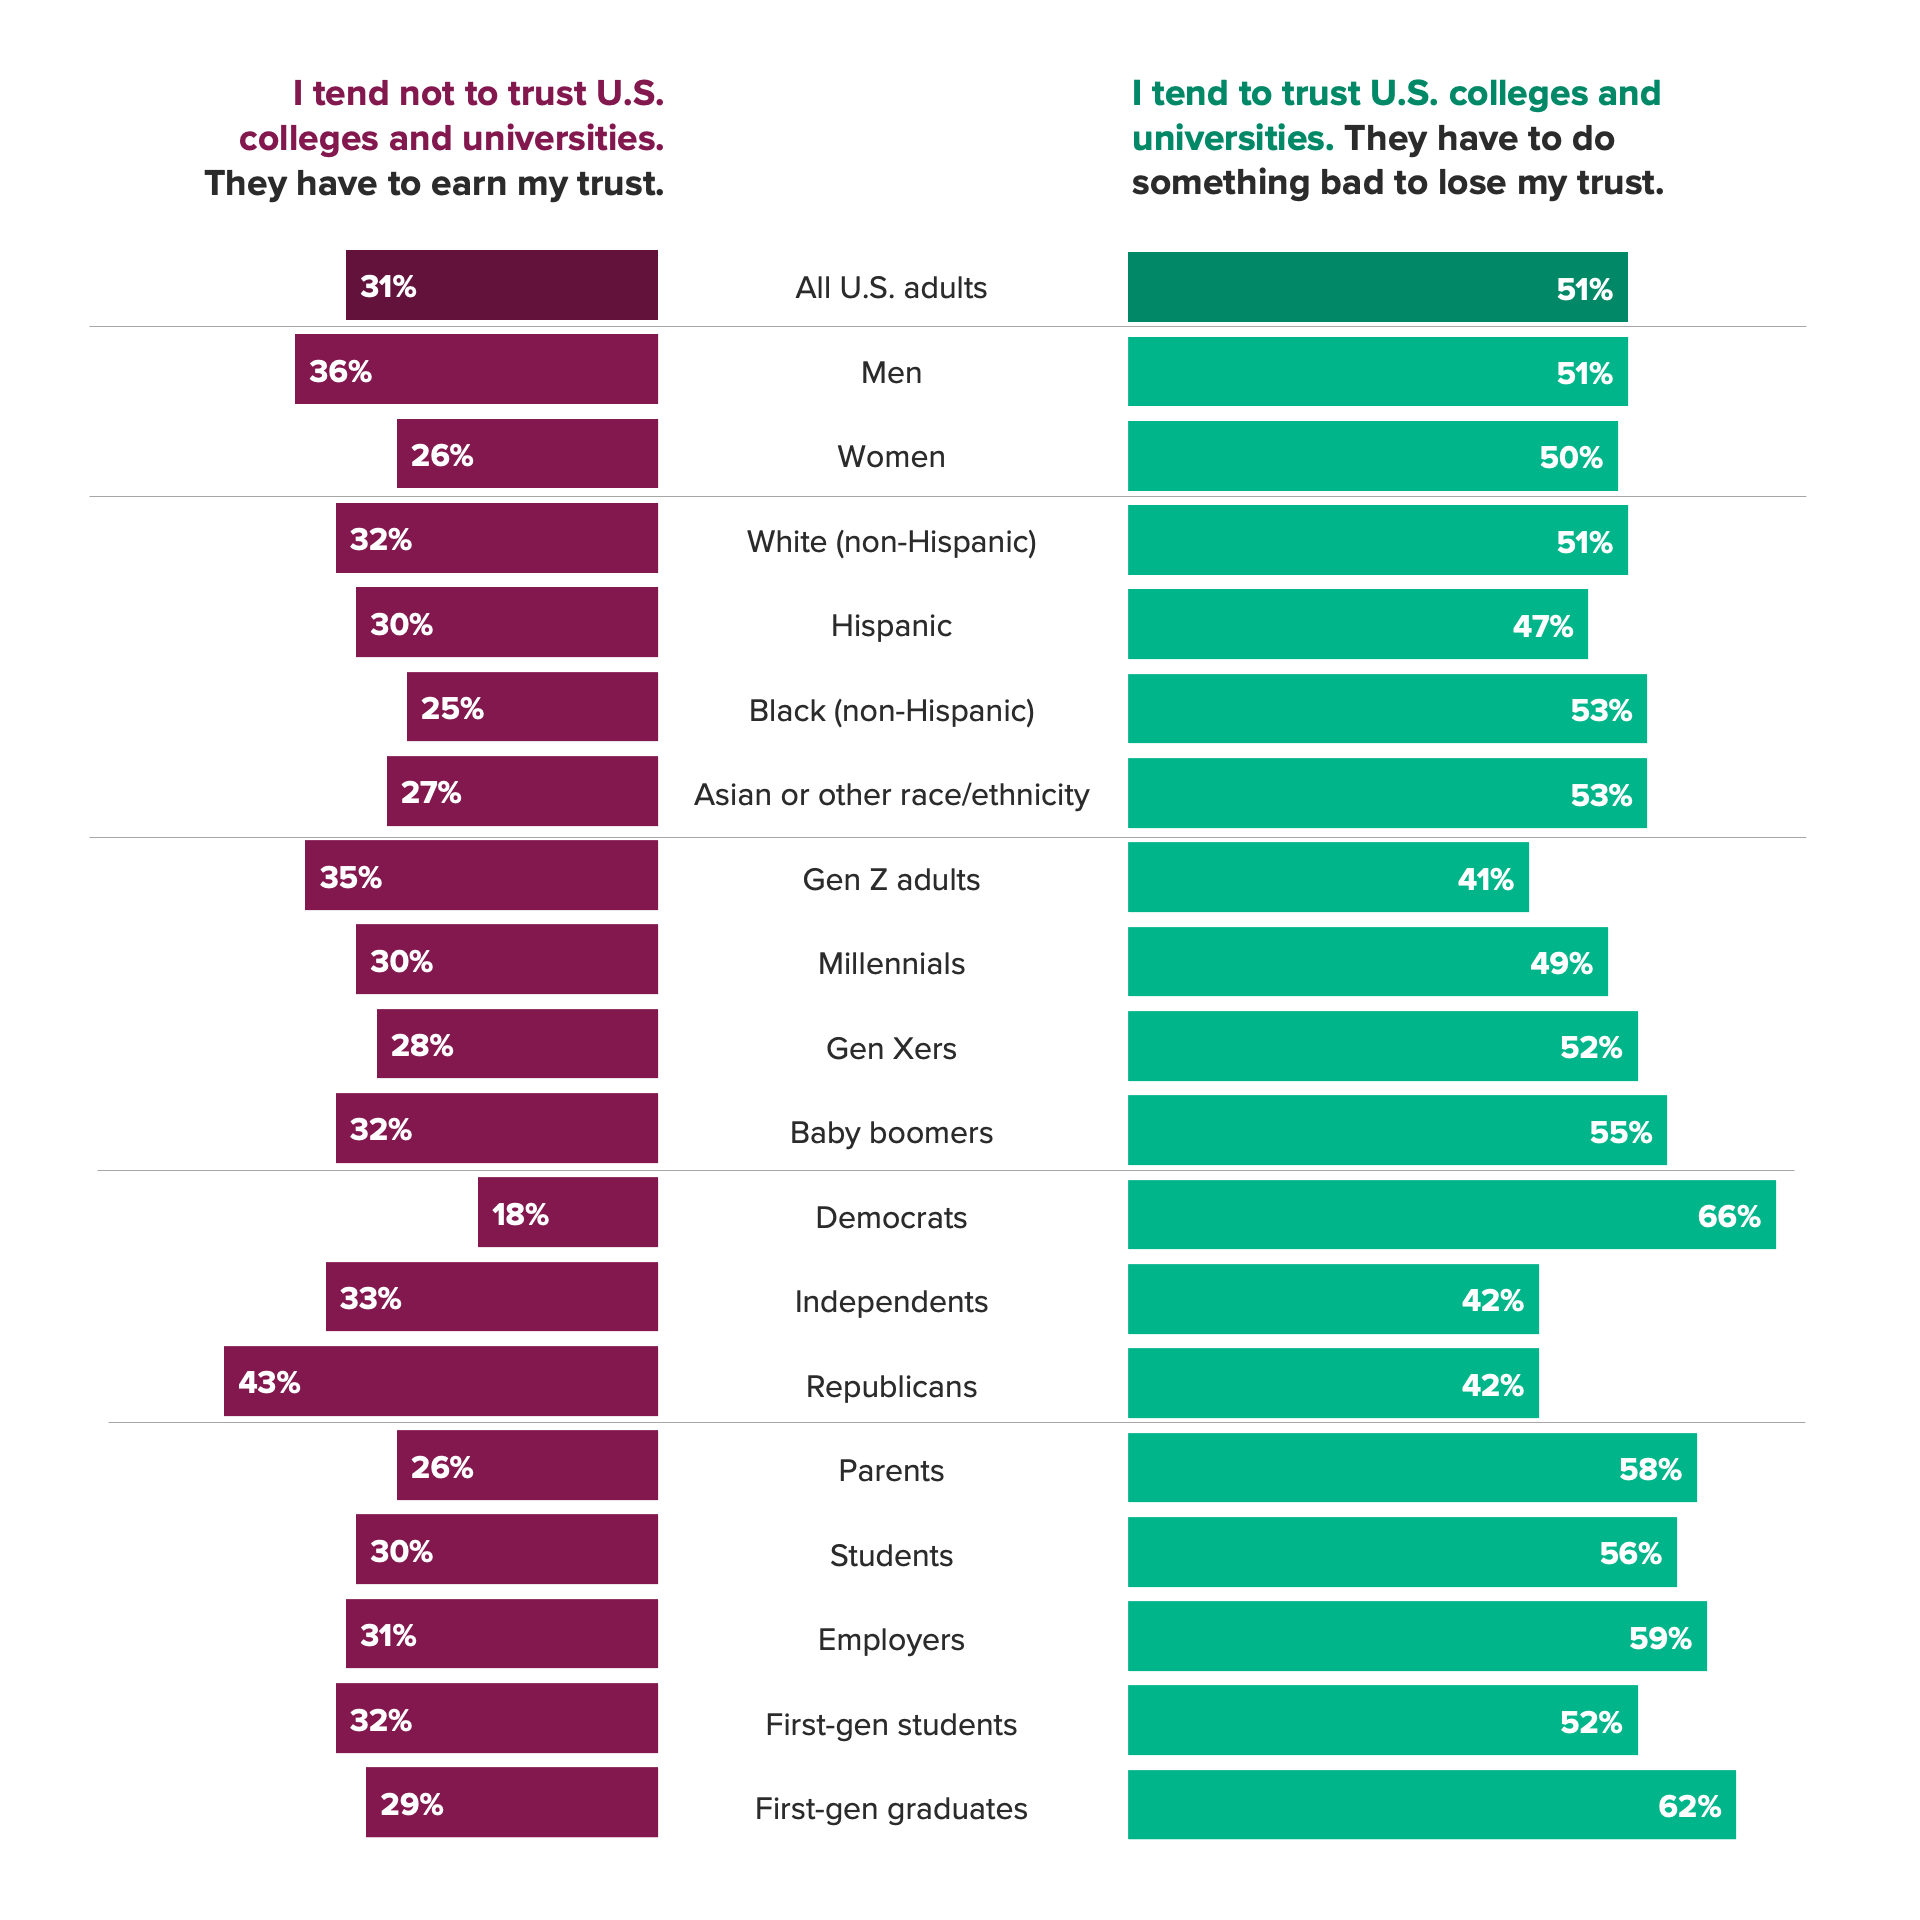 Butterfly chart showing trust for U.S. colleges and universities among different demographics demonstrating a gap in trust among Gen Z adults.